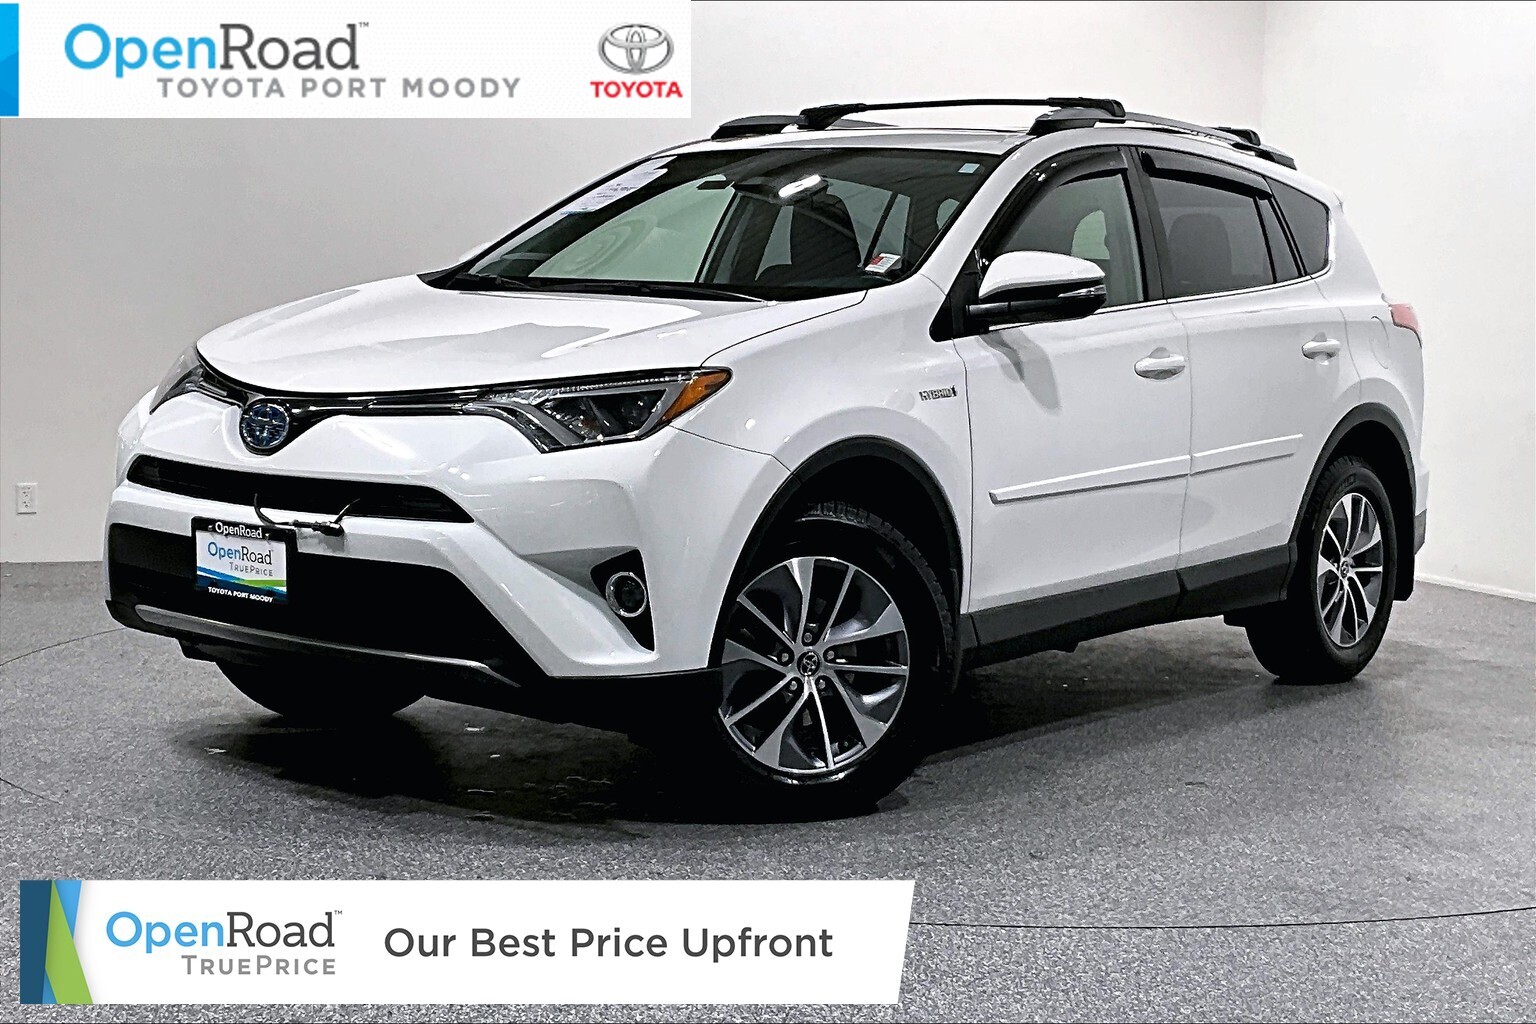 2017 Toyota RAV4 Hybrid LE+ |OpenRoad True Price |Local |One Owner |No Cla